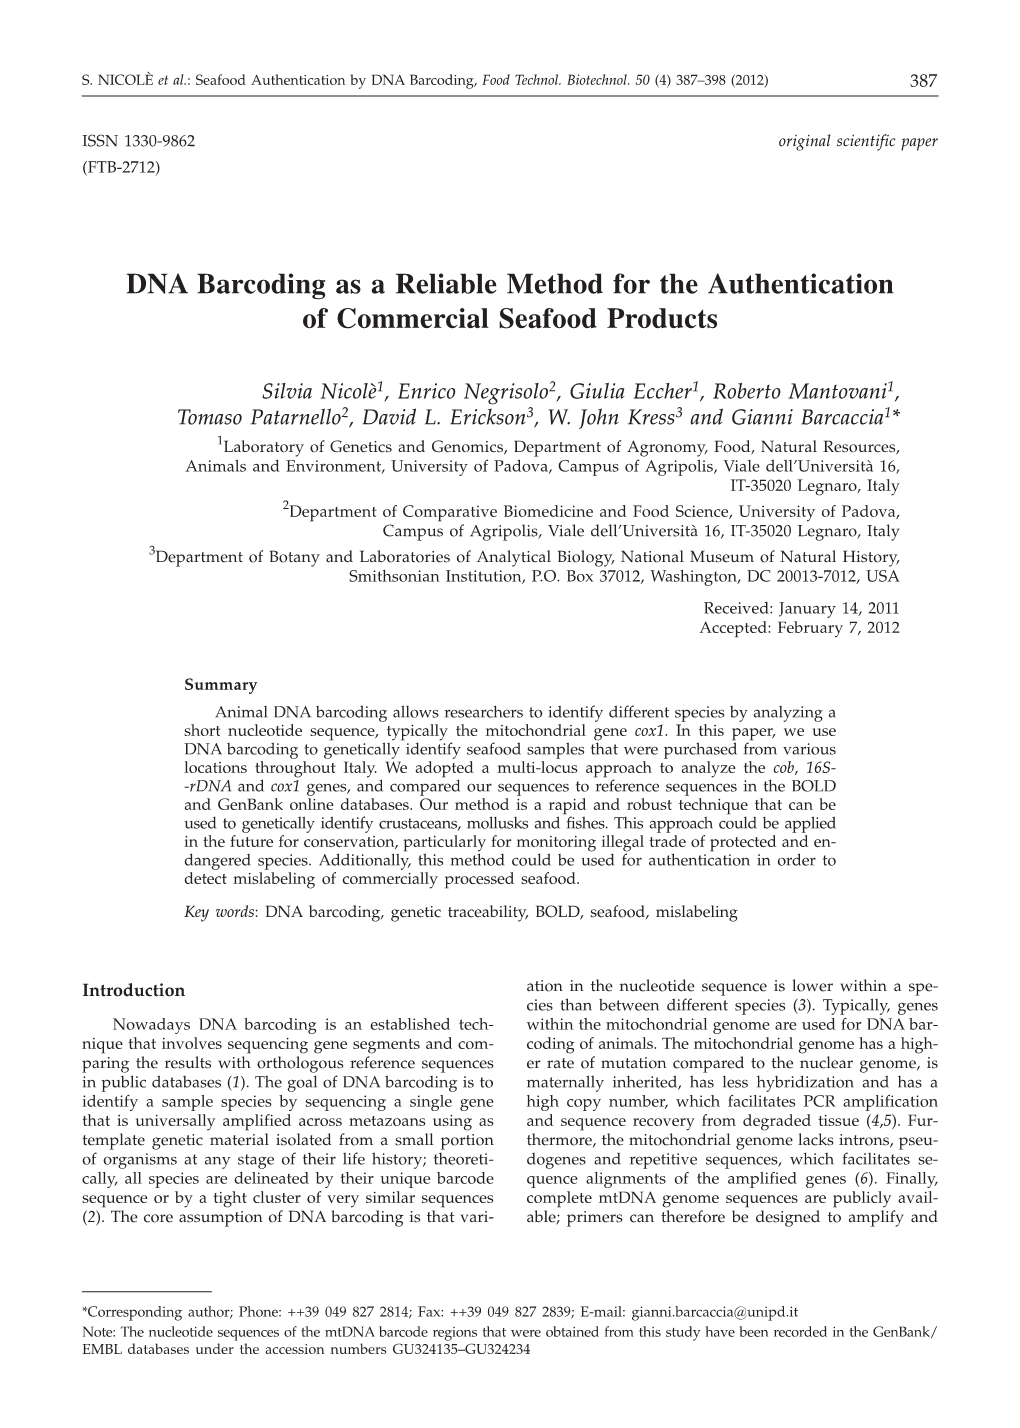 DNA Barcoding As a Reliable Method for the Authentication of Commercial Seafood Products